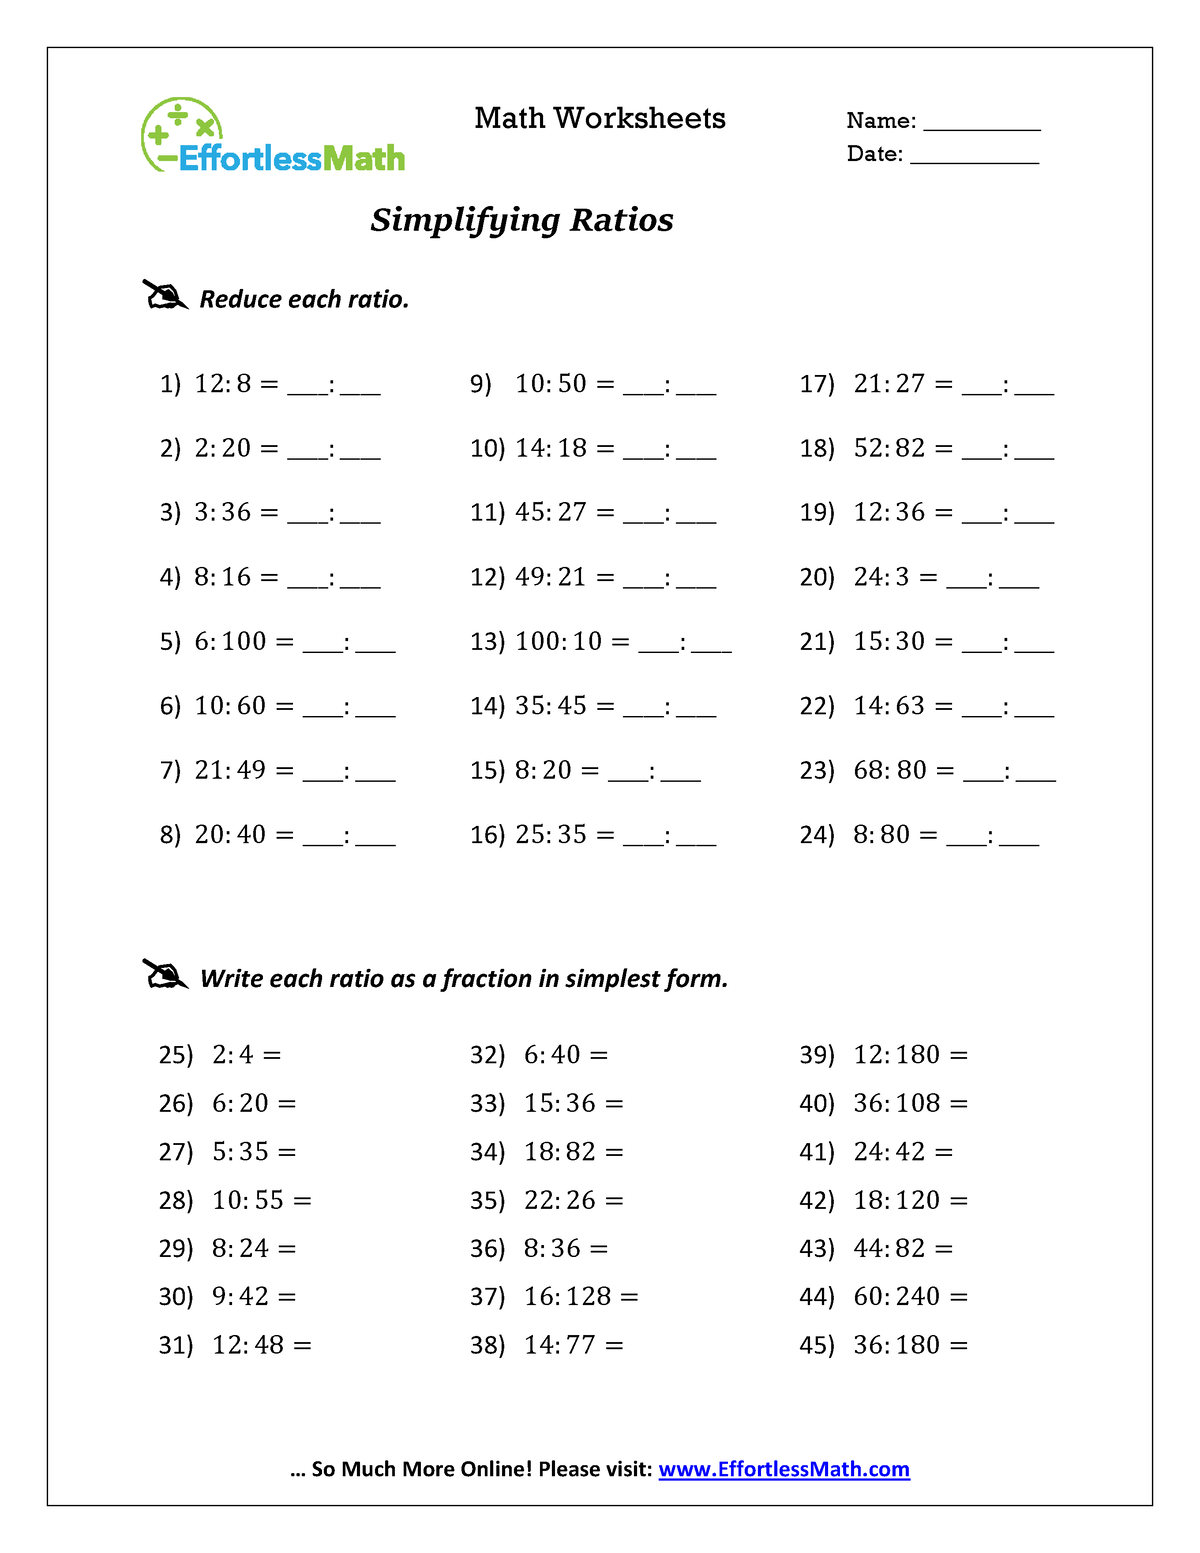 Simplifying Ratios For Noobs And More Math Worksheets Name 